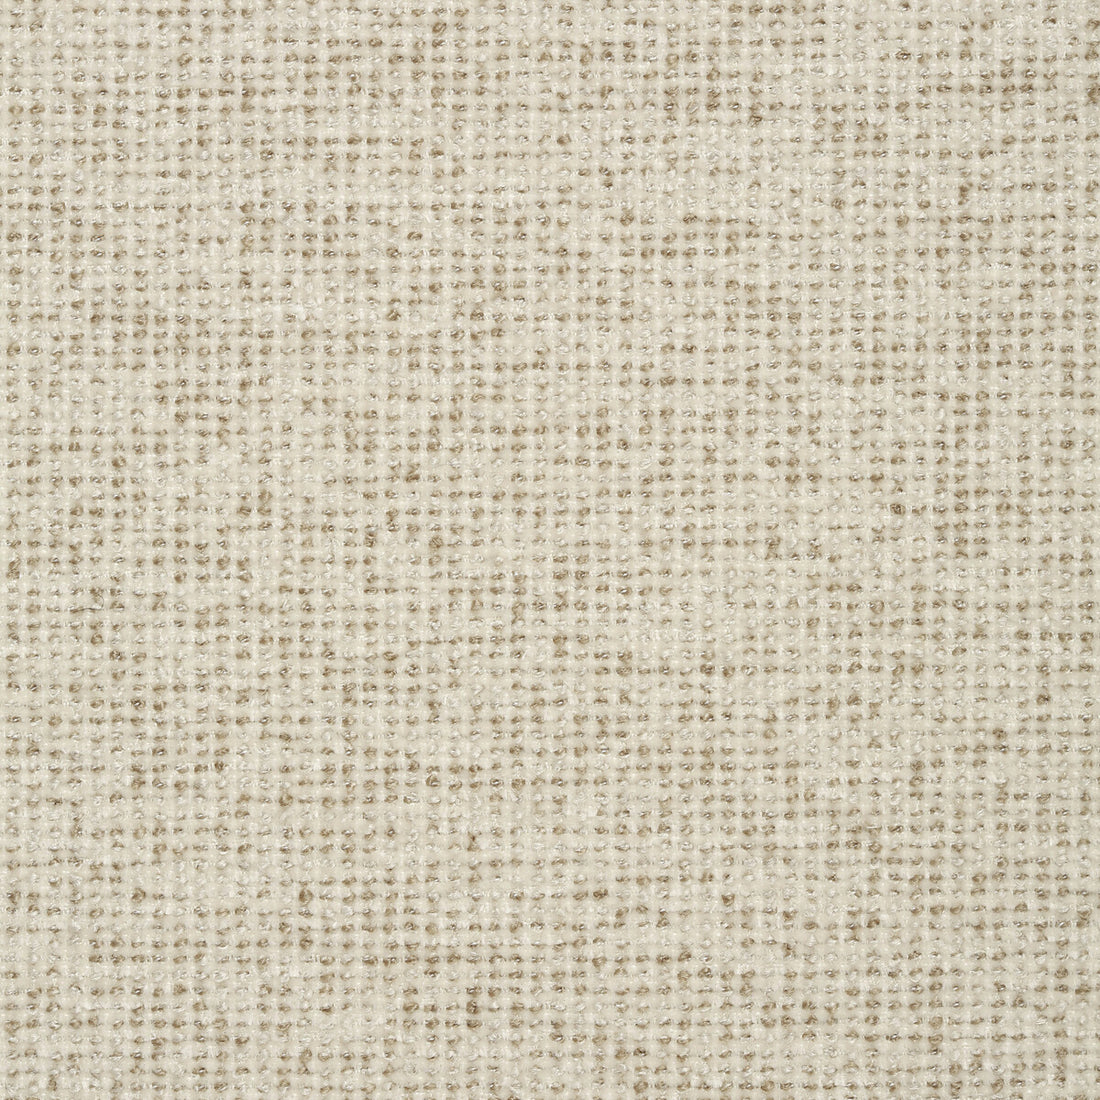 Kravet Smart fabric in 35115-116 color - pattern 35115.116.0 - by Kravet Smart in the Crypton Home collection